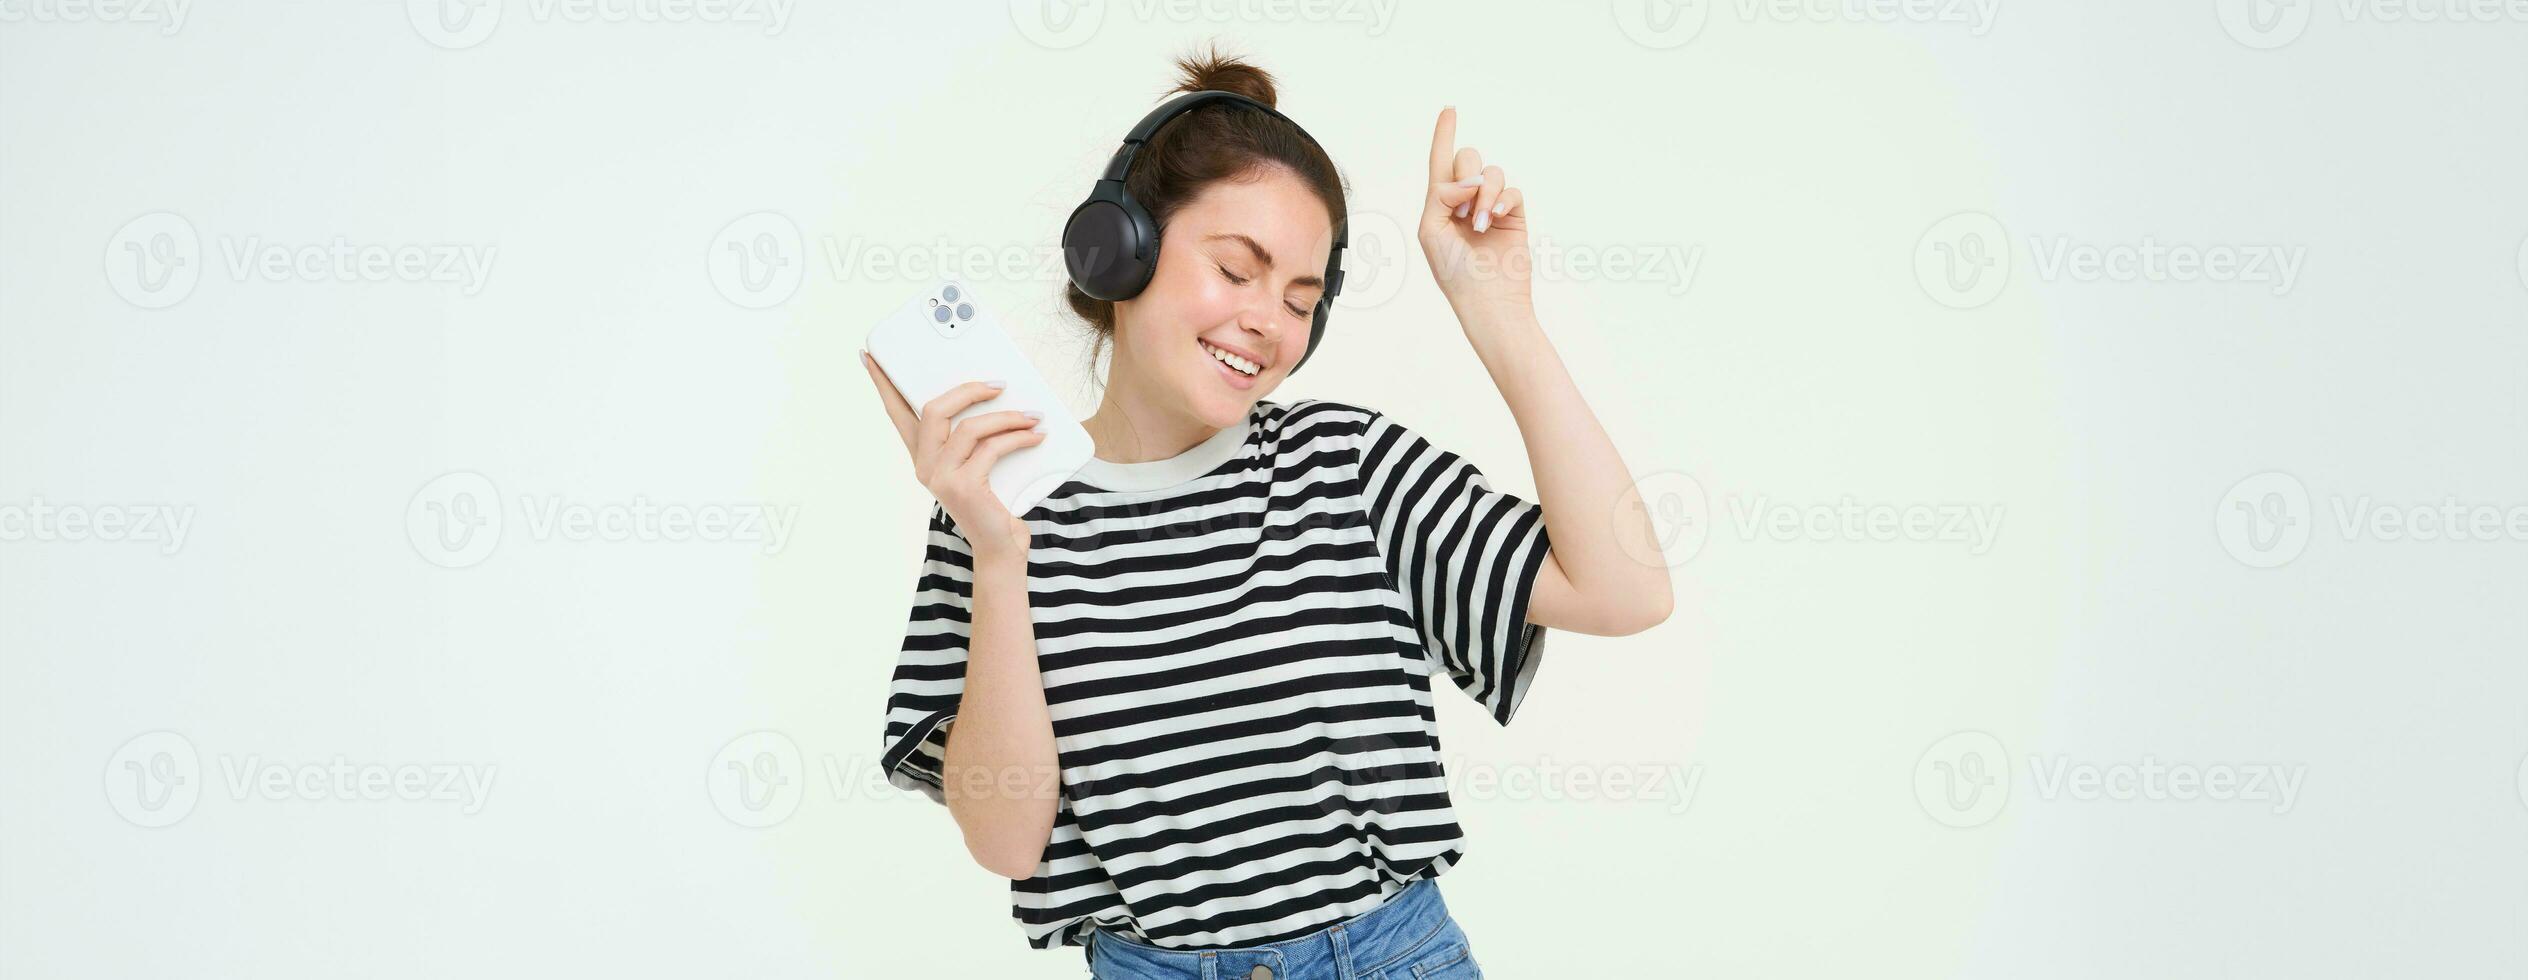 Portrait of happy woman with smartphone changes song on mobile phone streaming app, listens music in headphones, dancing against white background photo